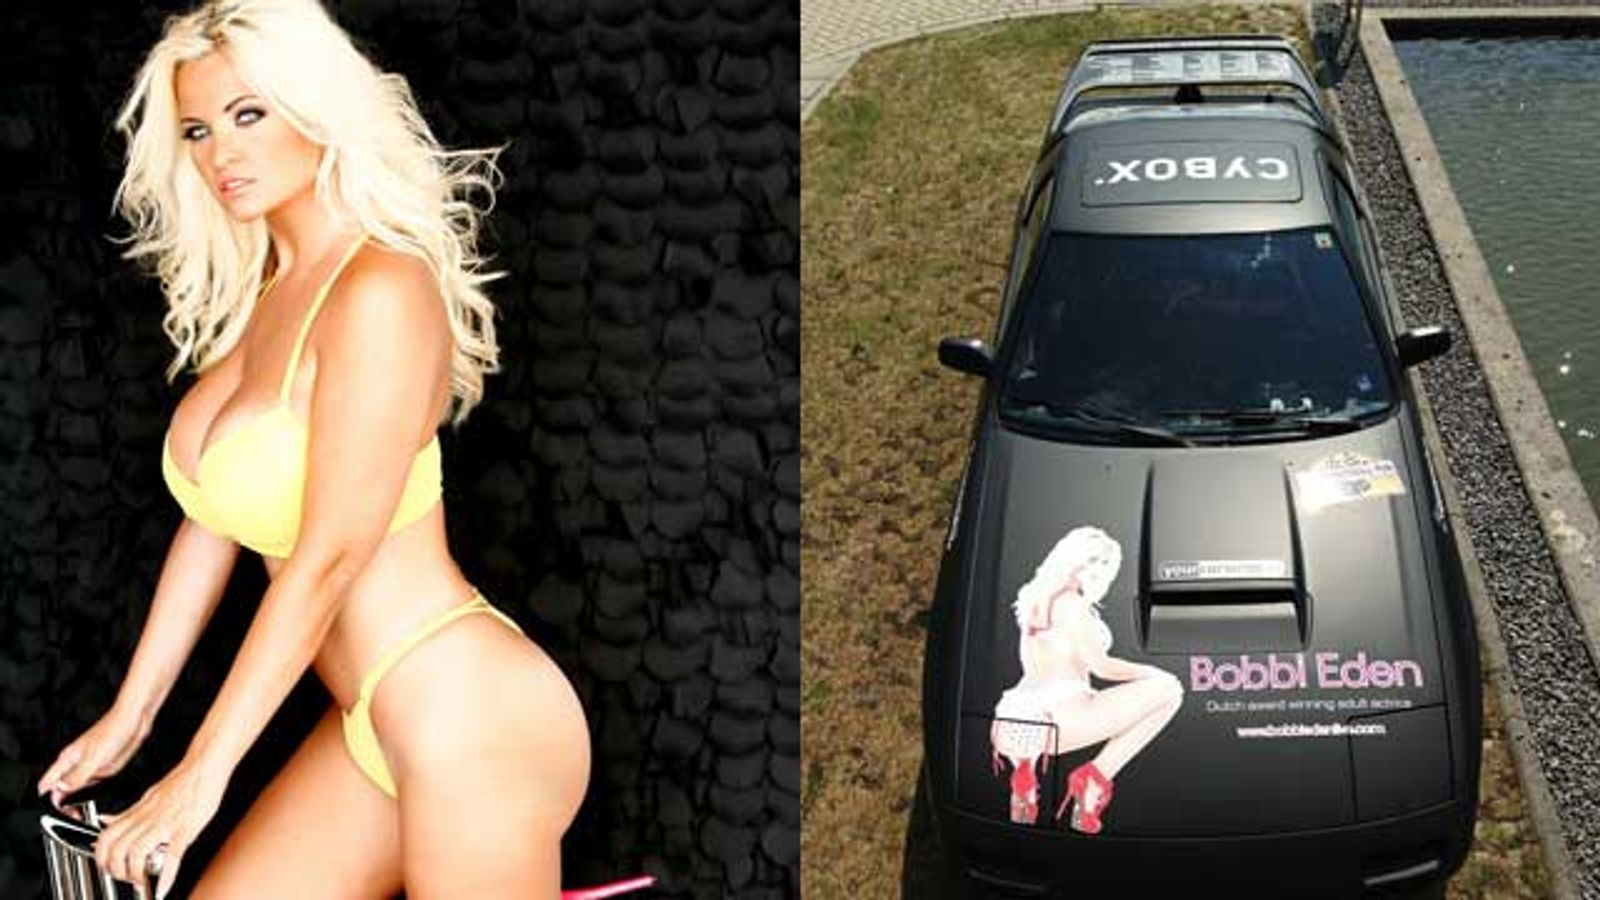 Bobbi Eden in Dutch Reality Show, Has Car Competing in Cannonball Run